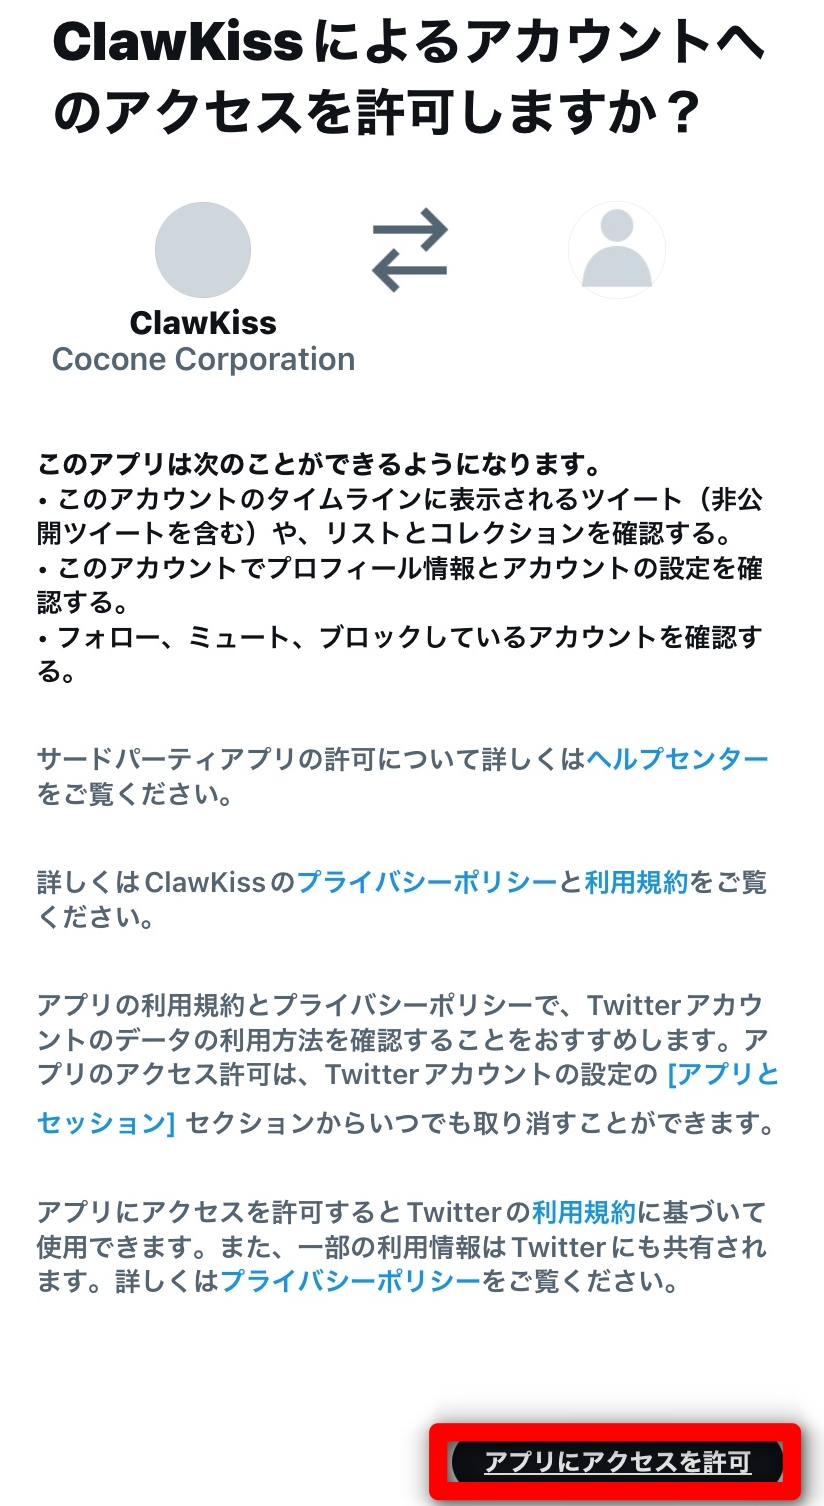 Claw Kiss Twitter連携画面